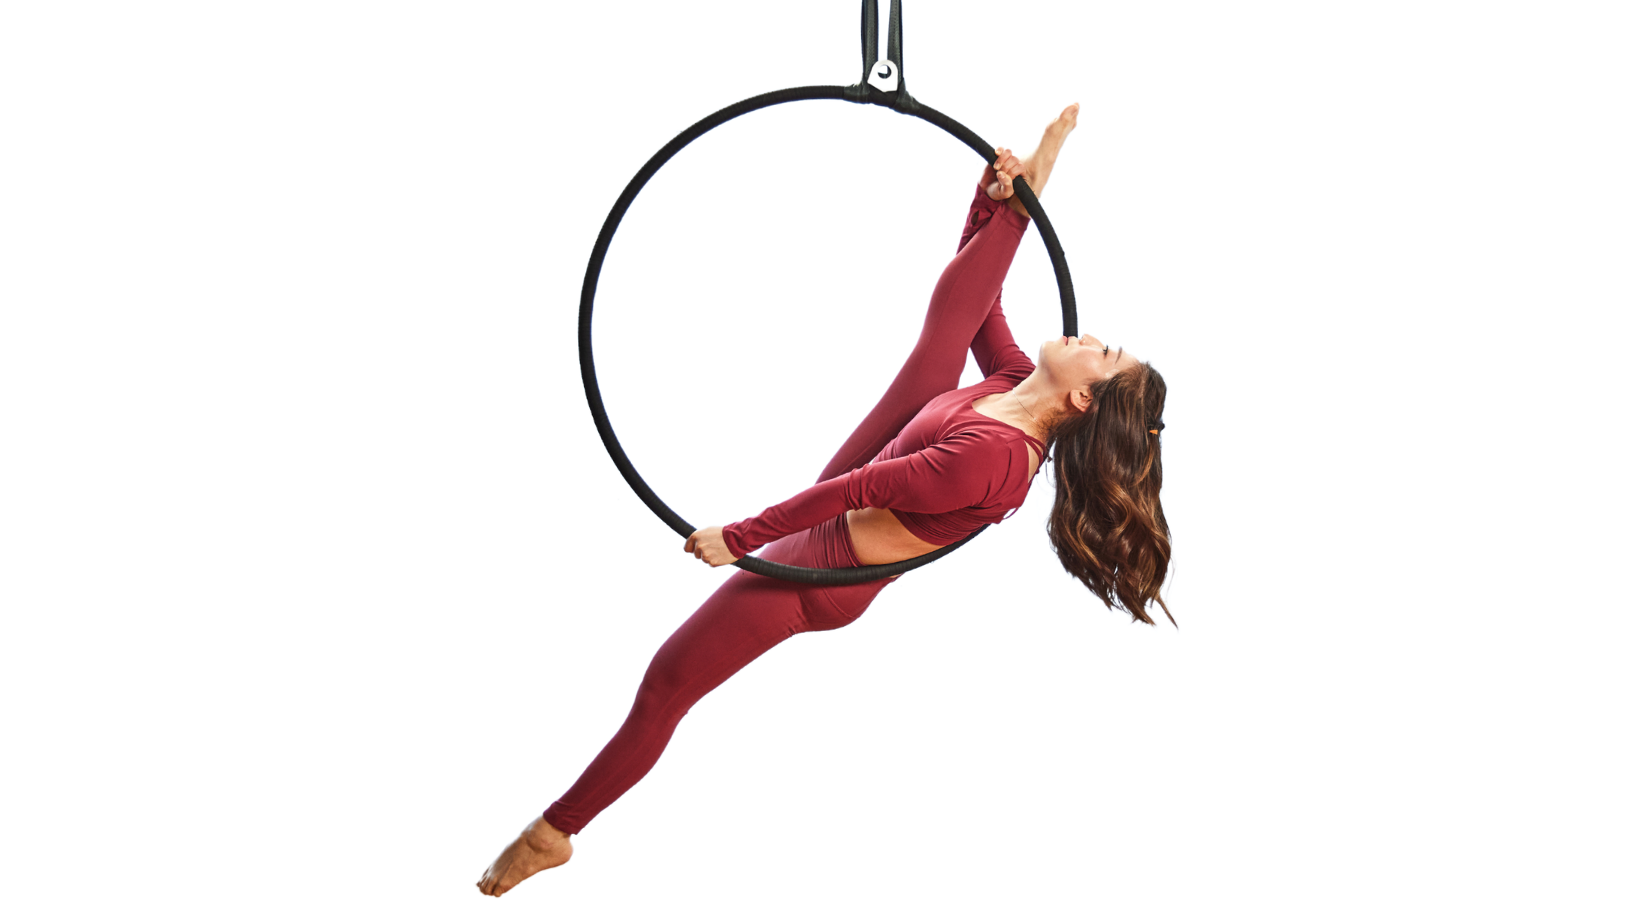 Aerial Hoop - A Class that uses a circular steel like hulahoop hanging from the ceiling to perform aerial acrobatics tricks and flows where it can improve your strength, flexibility, and grace. - Available in all FITsy Studios